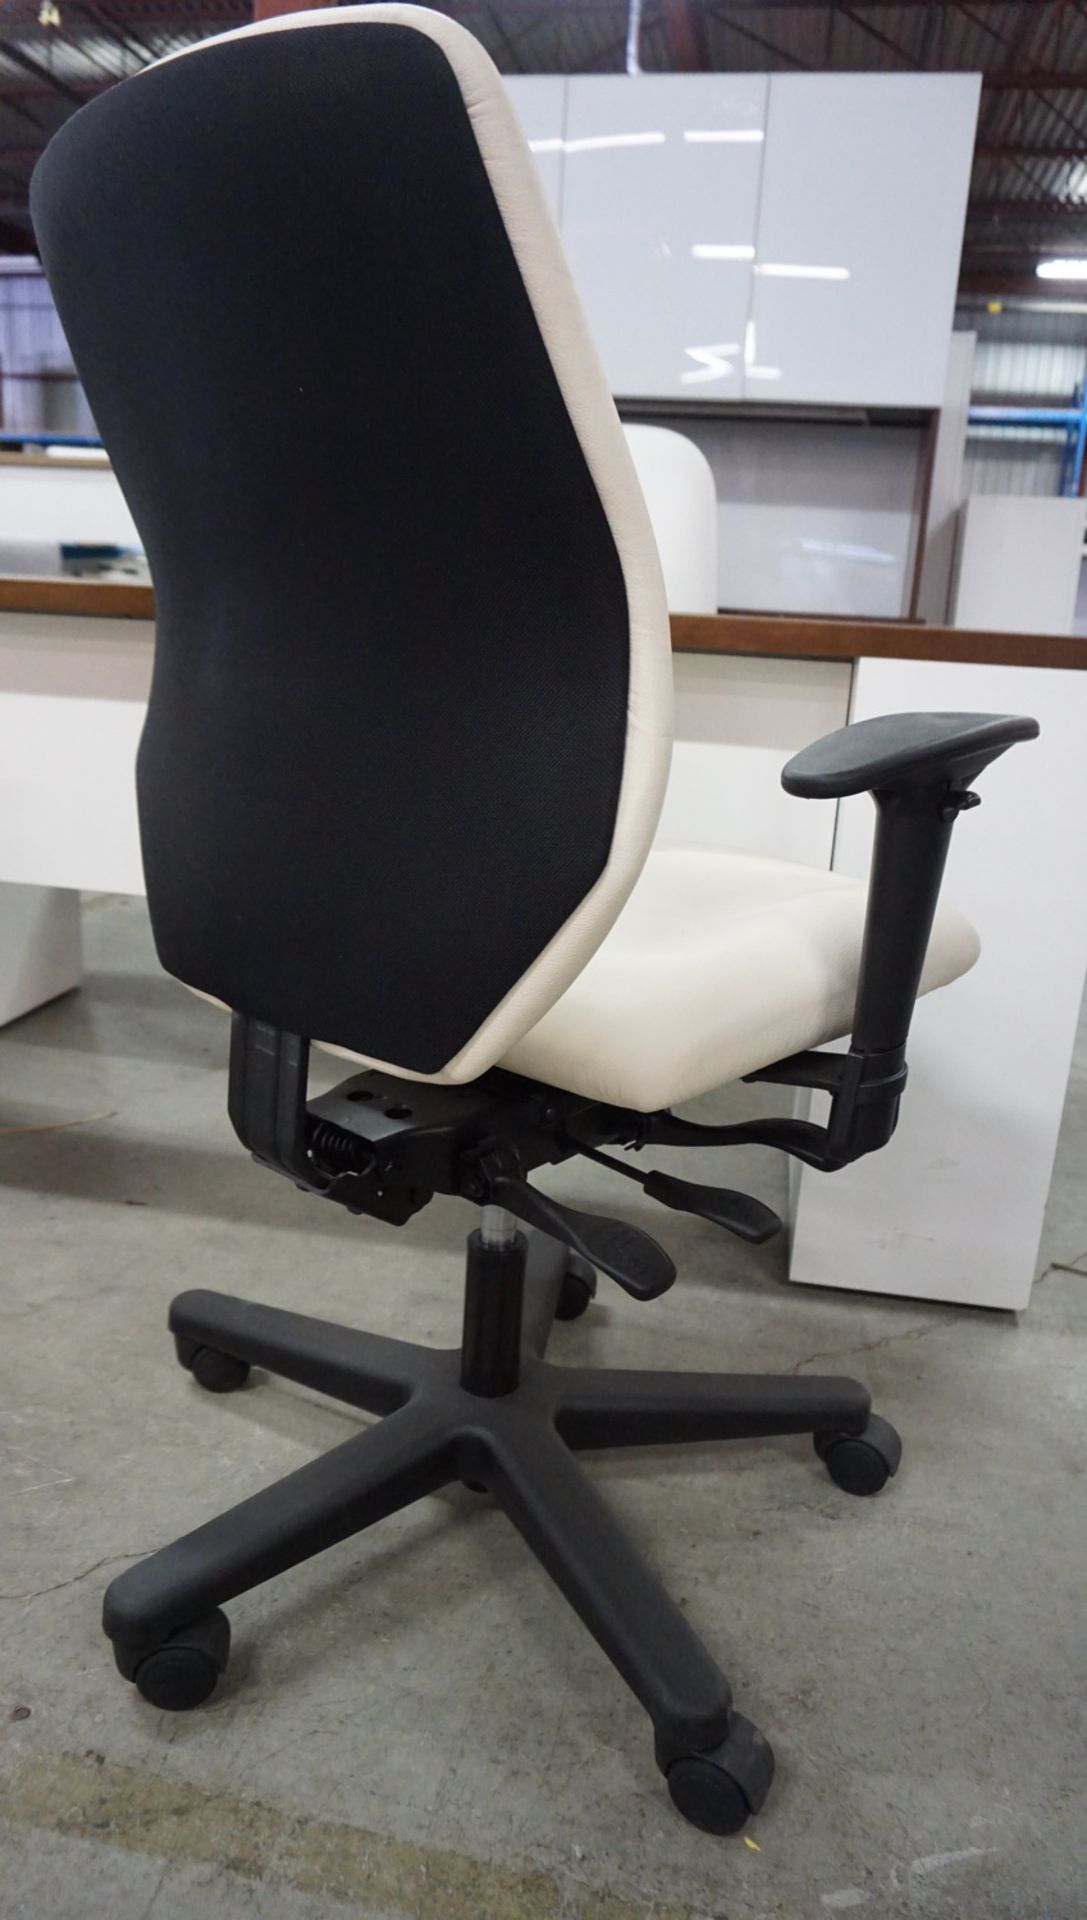 ALL SEATING LEATHER (CREAM) PNEU ADJ OFFICE CHAIR - Image 2 of 2